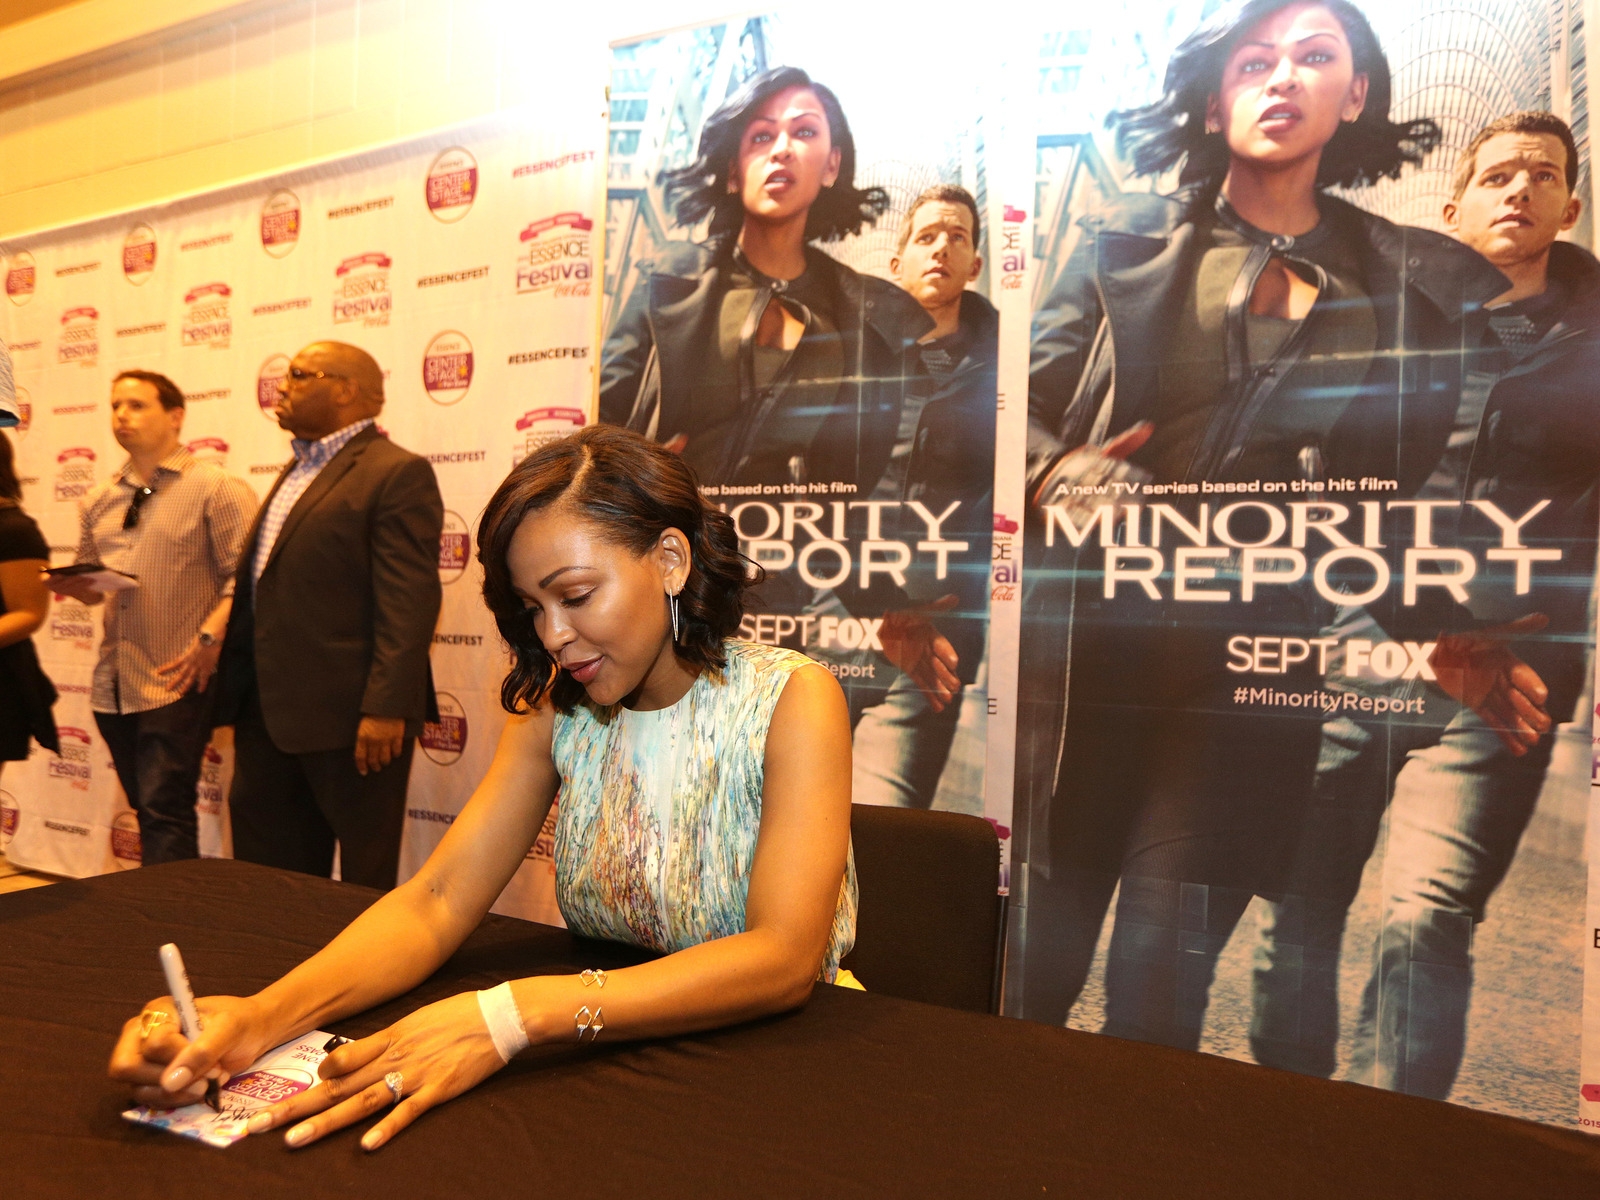 Minority Report Autograph Session for 1600 x 1200 resolution